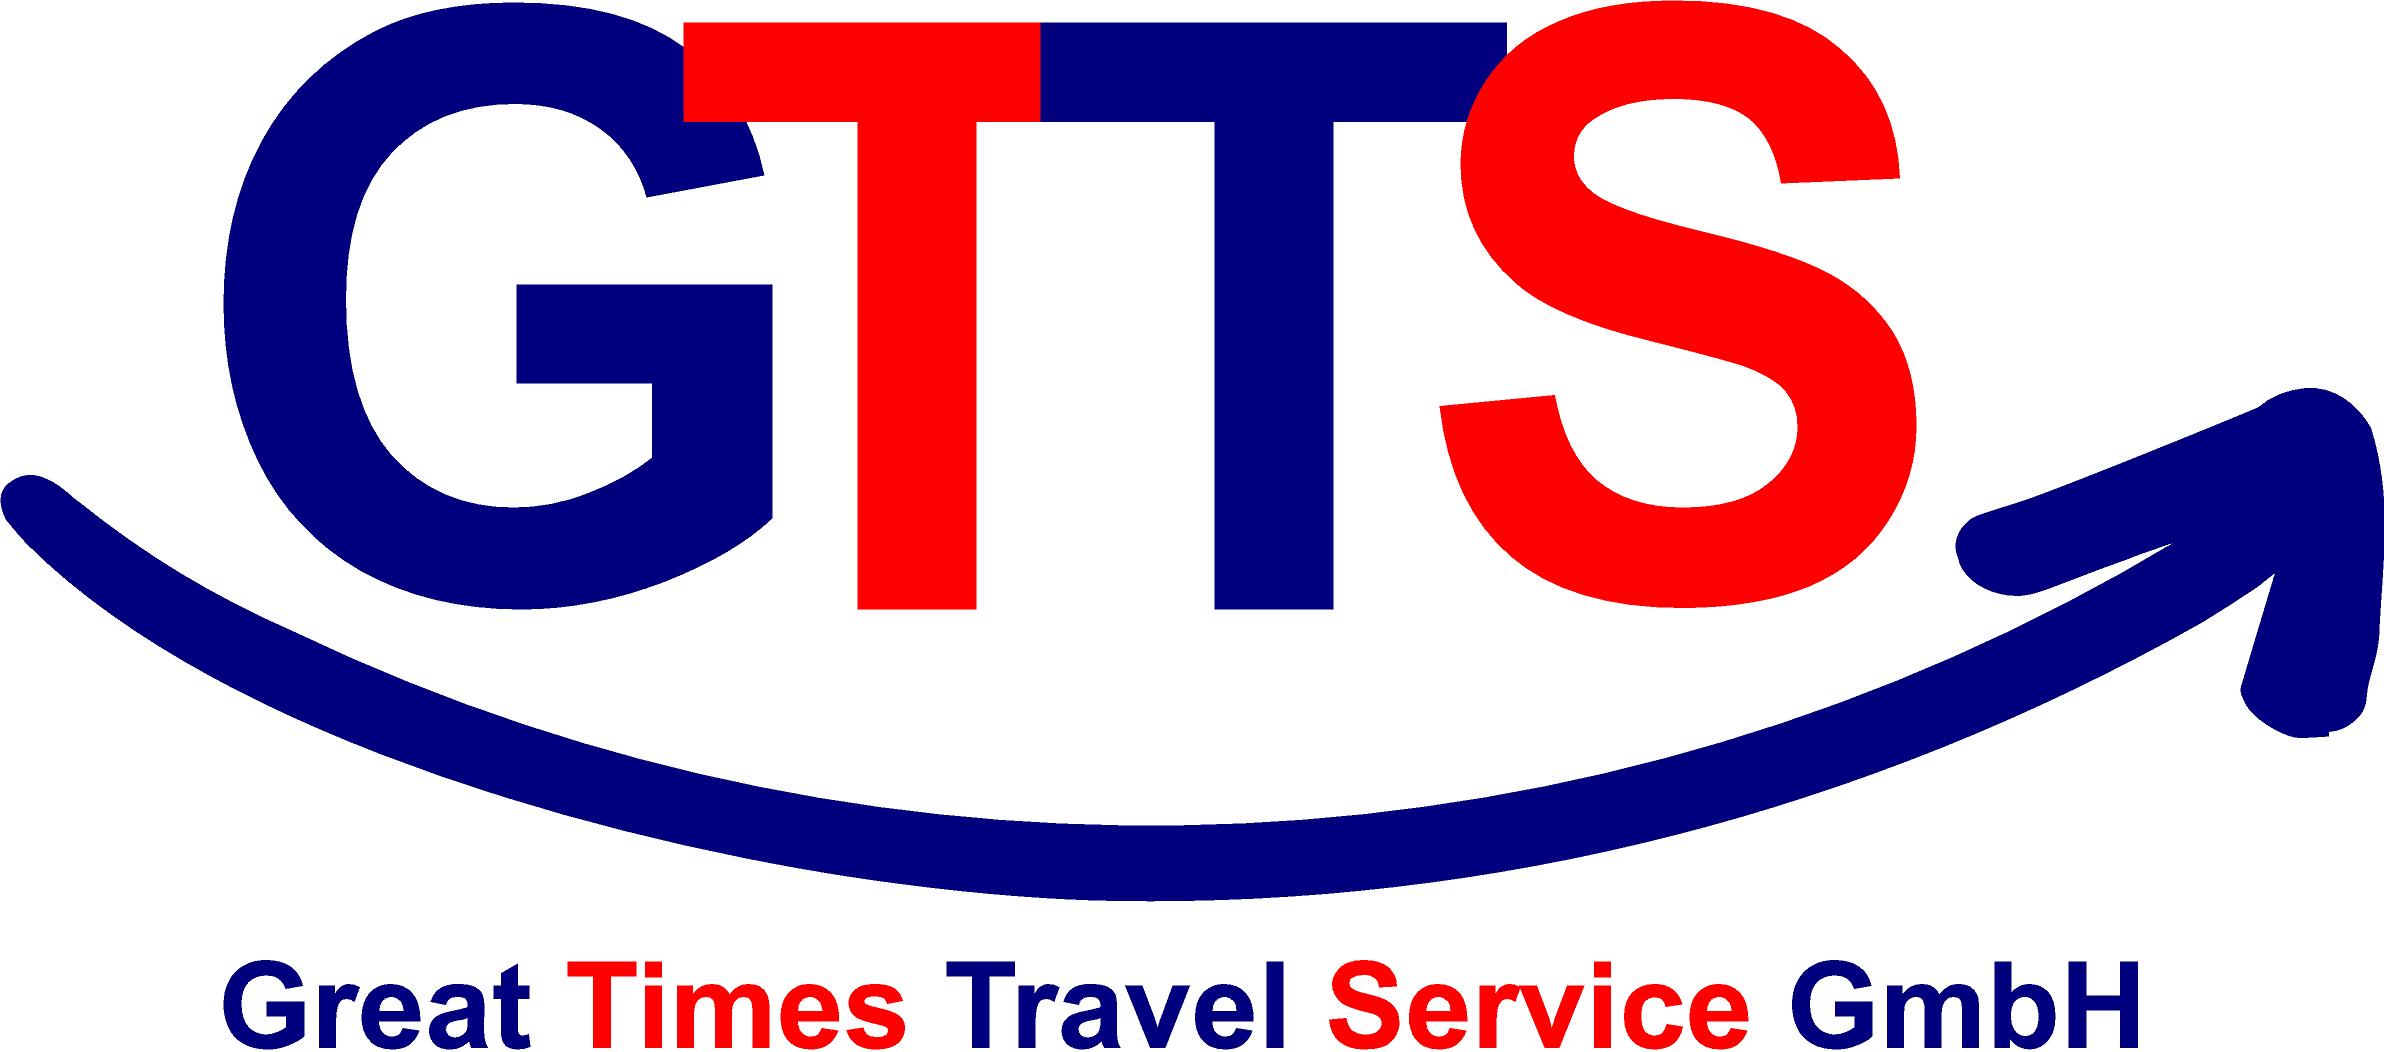 Great Times Travel Service